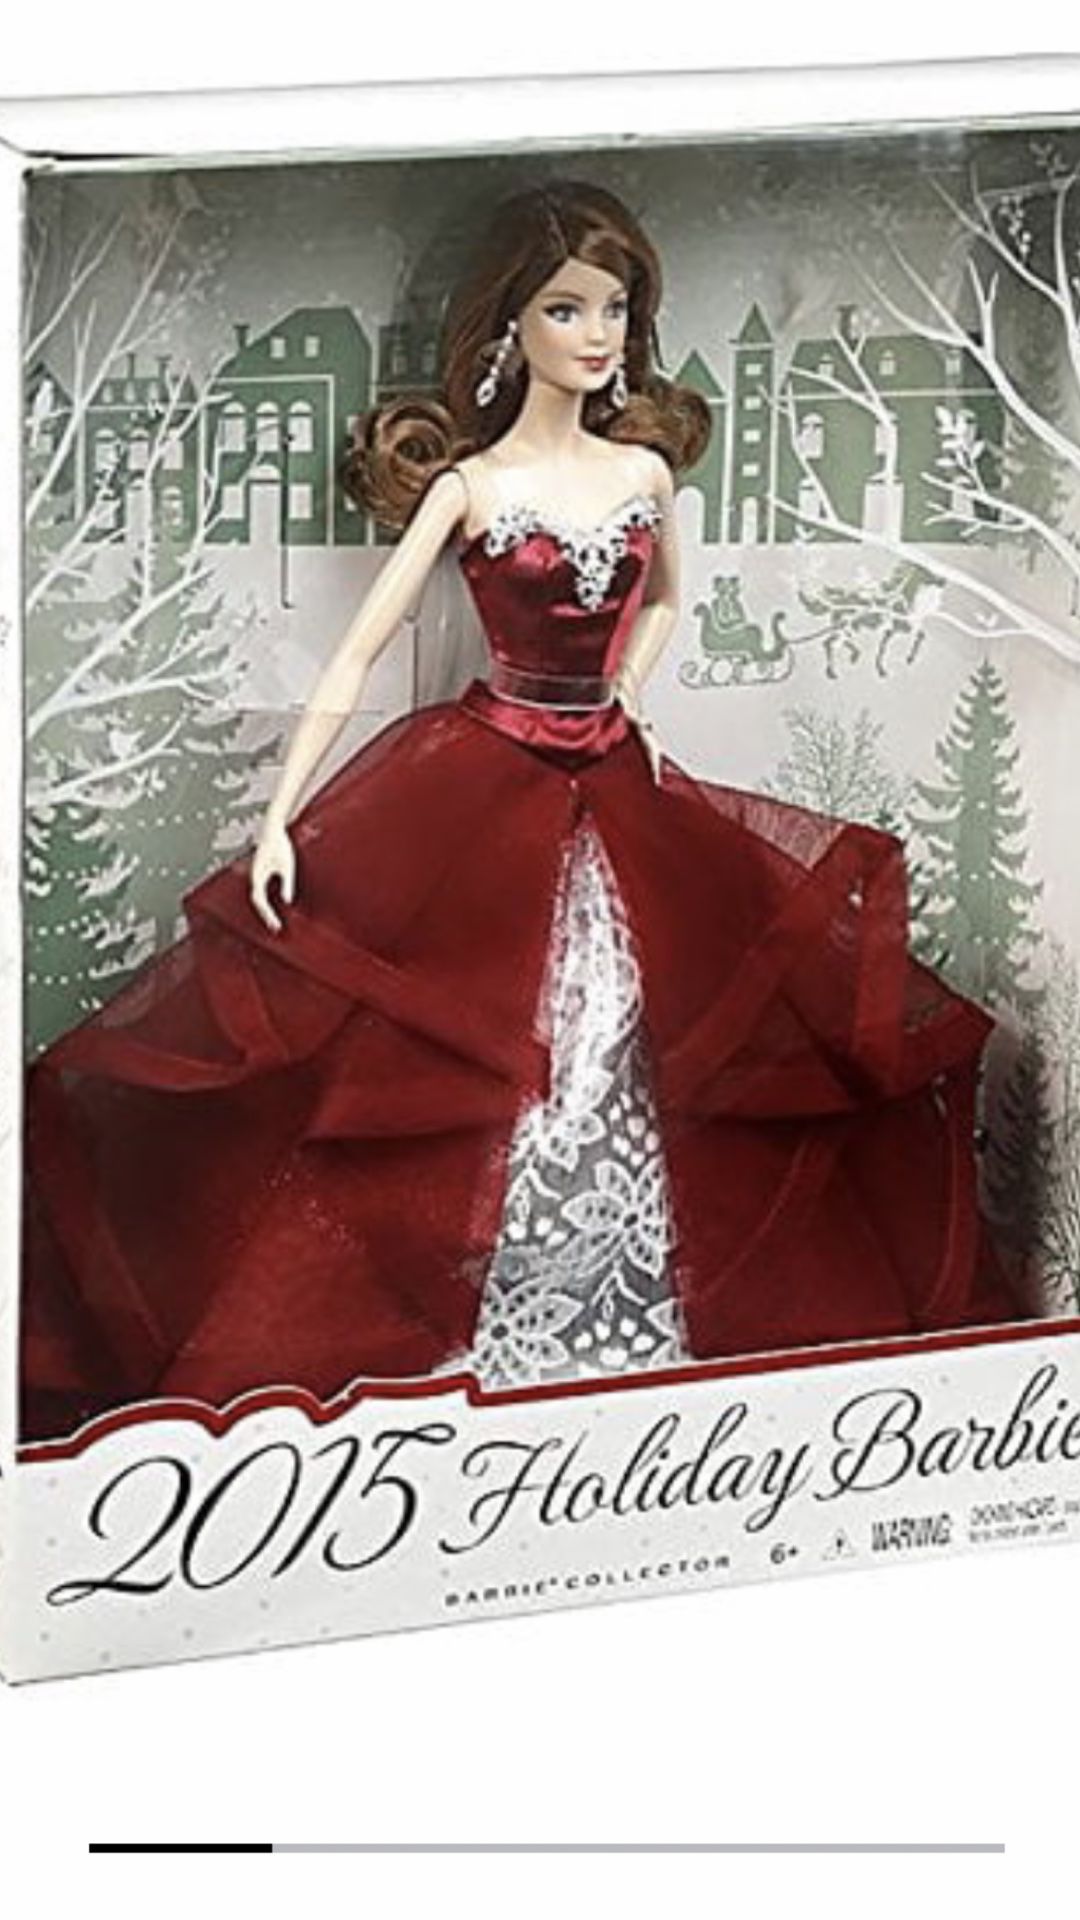 HOLIDAY BARBIE YEAR ( 2015 )